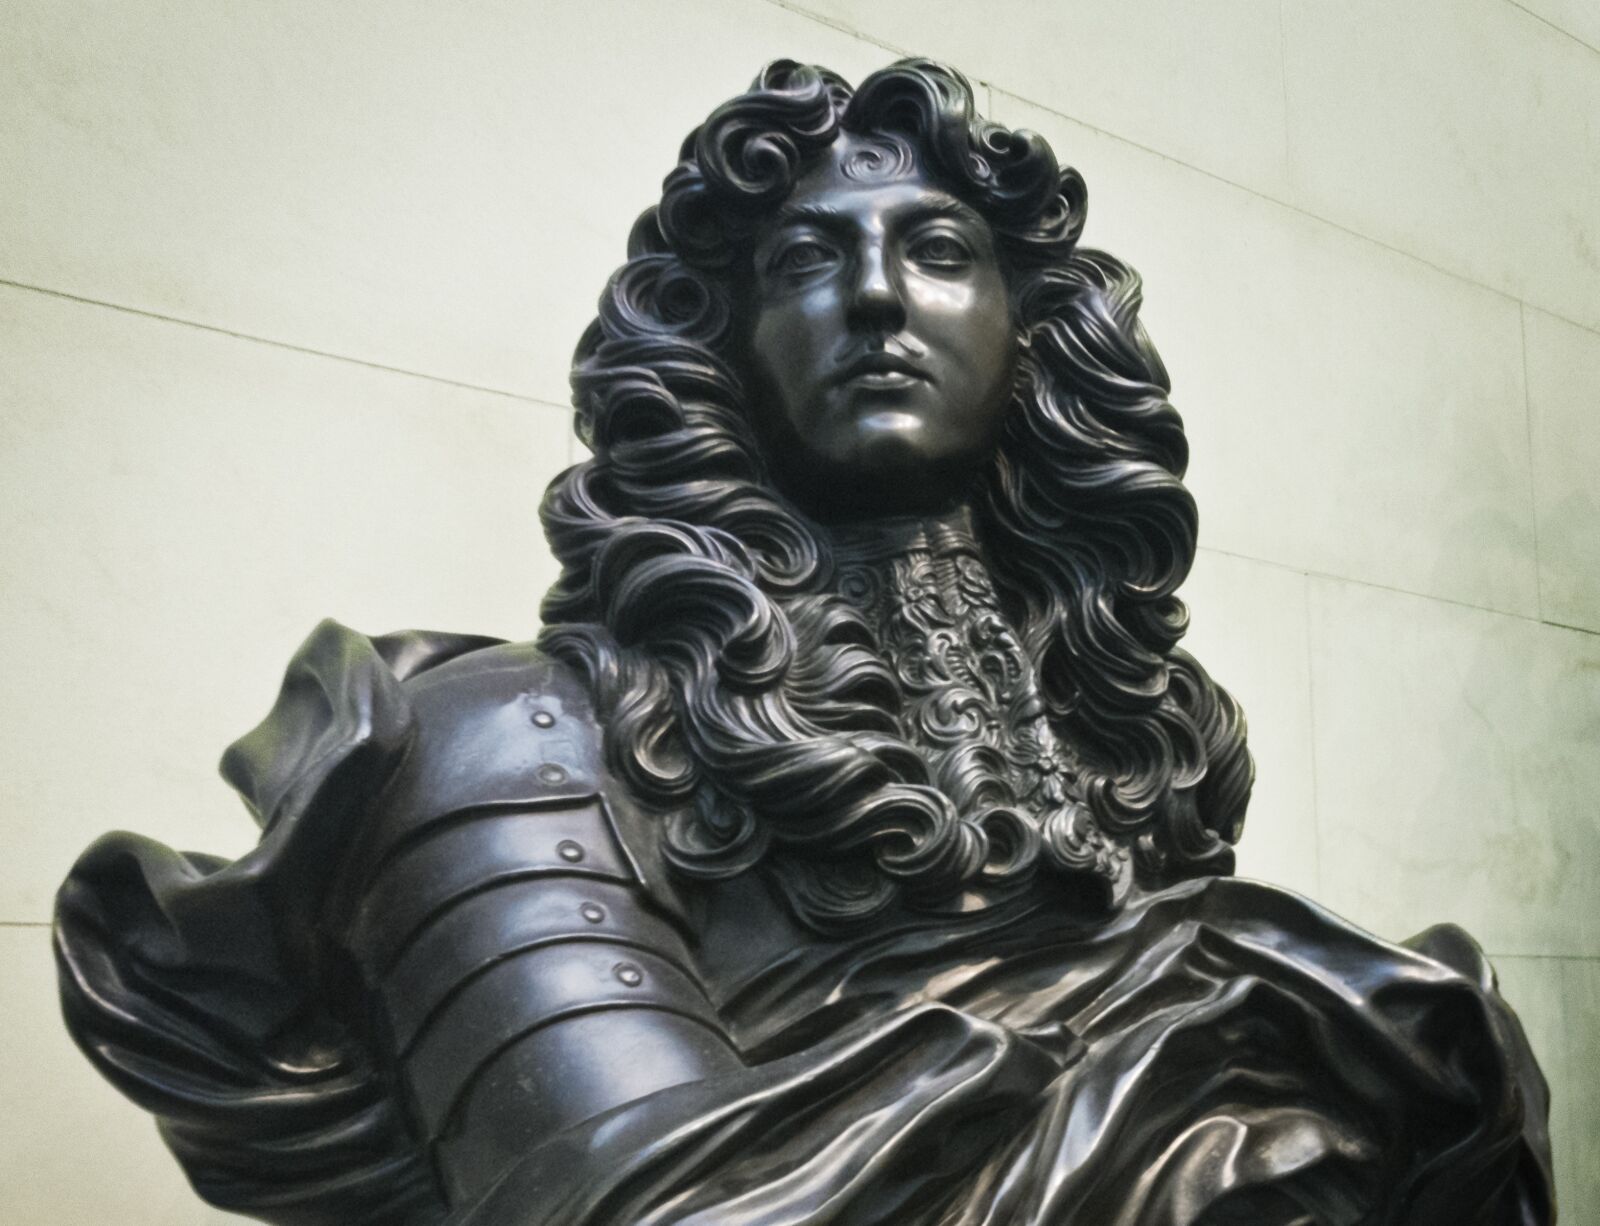 OnePlus A3000 sample photo. Louis xiv, bust, statue photography